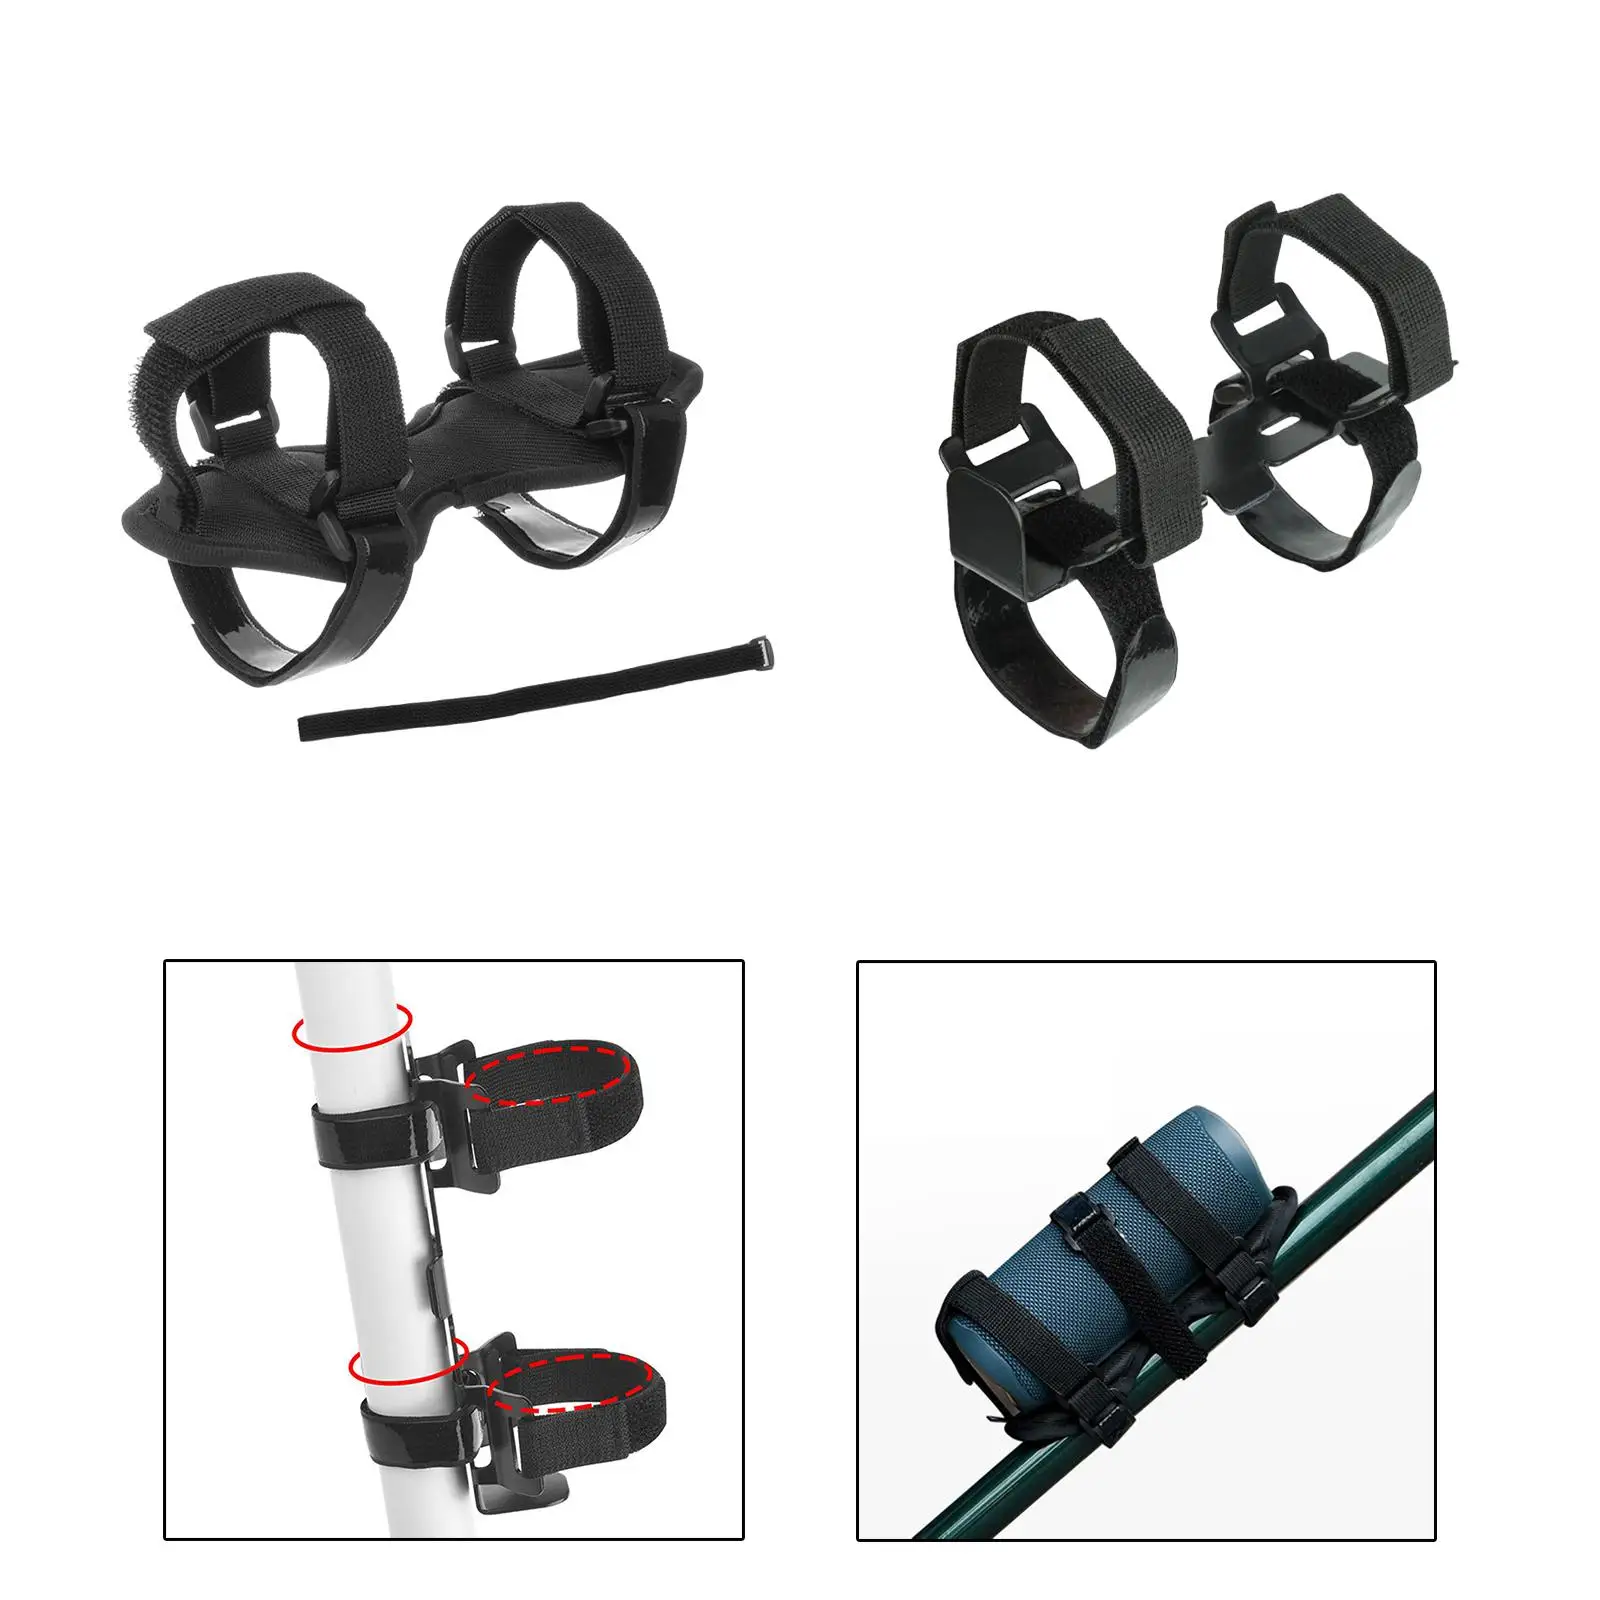 Road Portable Speaker Mount Cycling Drink Cup Holder for Golf Cart Attachment